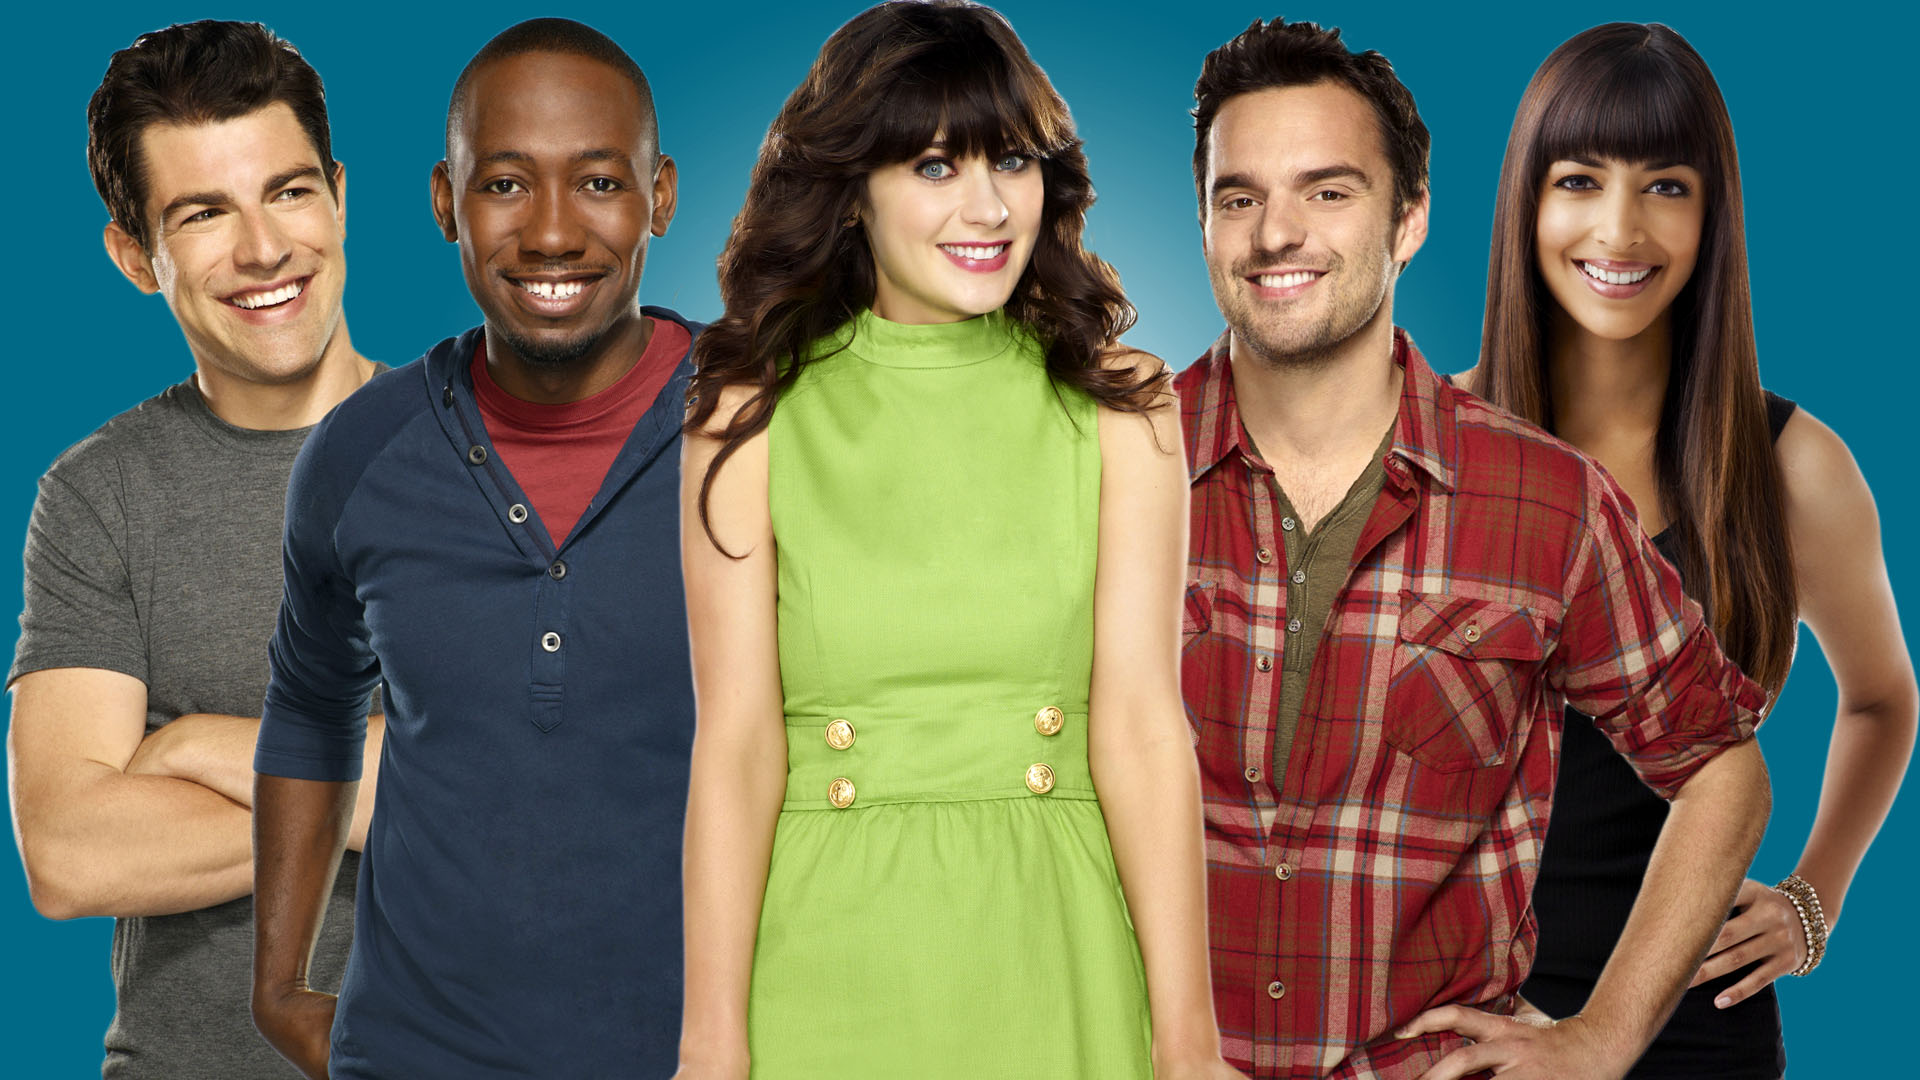 new girl wallpaper,people,social group,youth,friendship,event